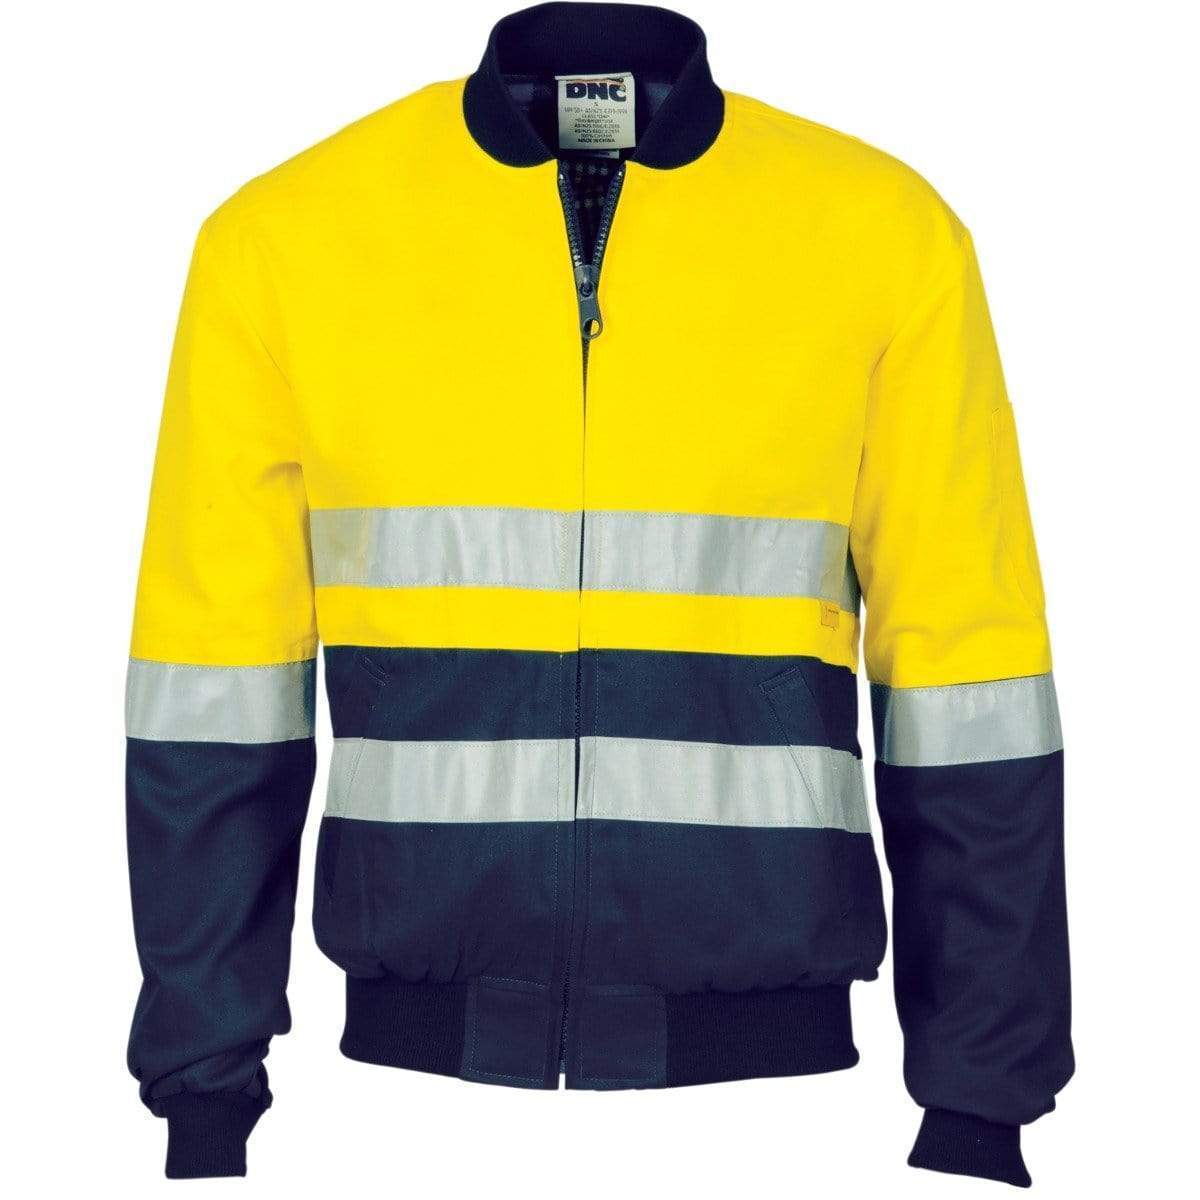 DNC Workwear Work Wear Yellow/Navy / XS DNC WORKWEAR Hi-Vis Two-Tone D/N Cotton Bomber Jacket with 3M Reflective Tape 3758